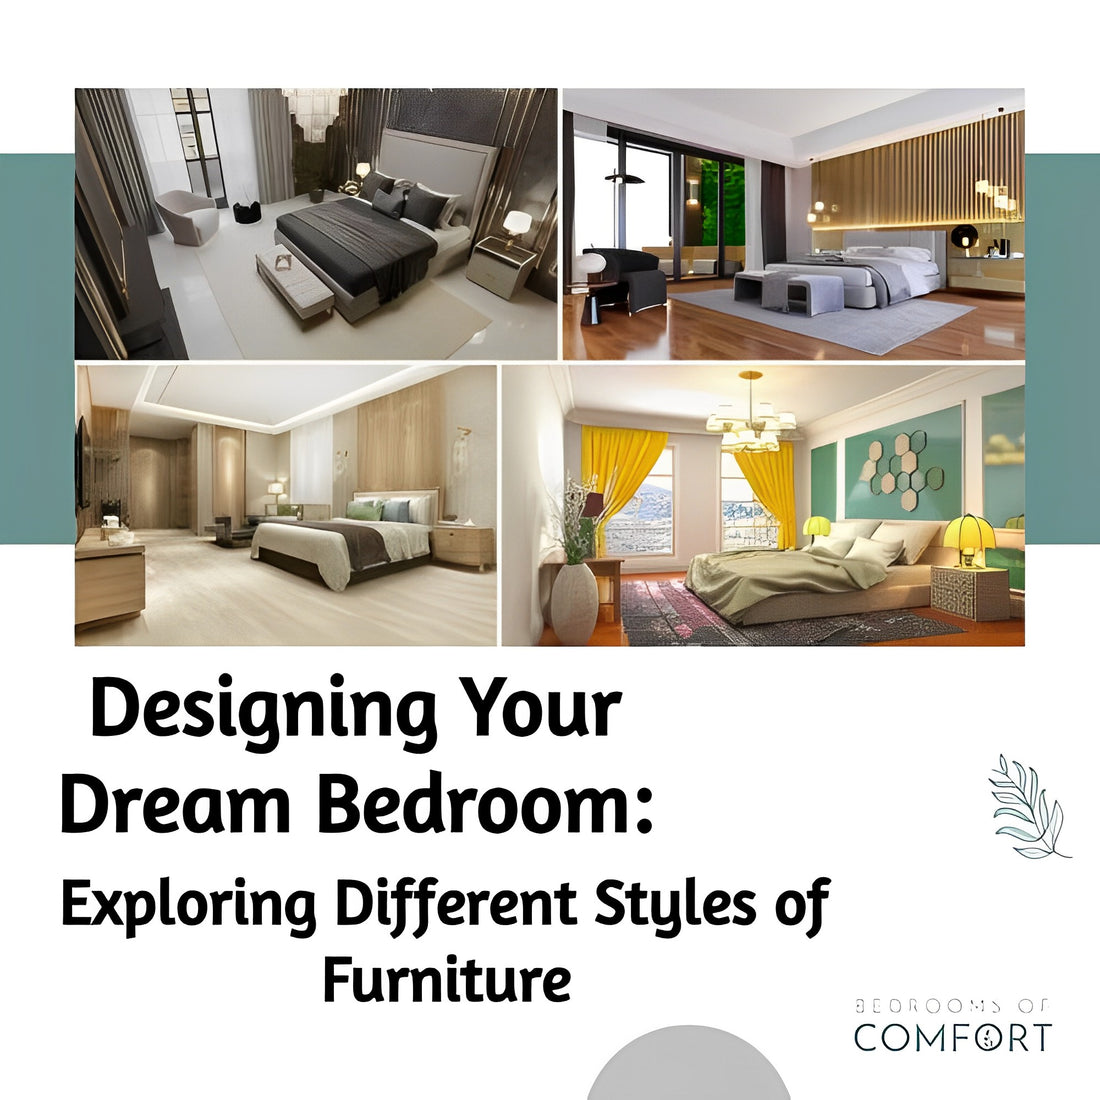 Designing Your Dream Bedroom: Exploring Different Styles of Furniture